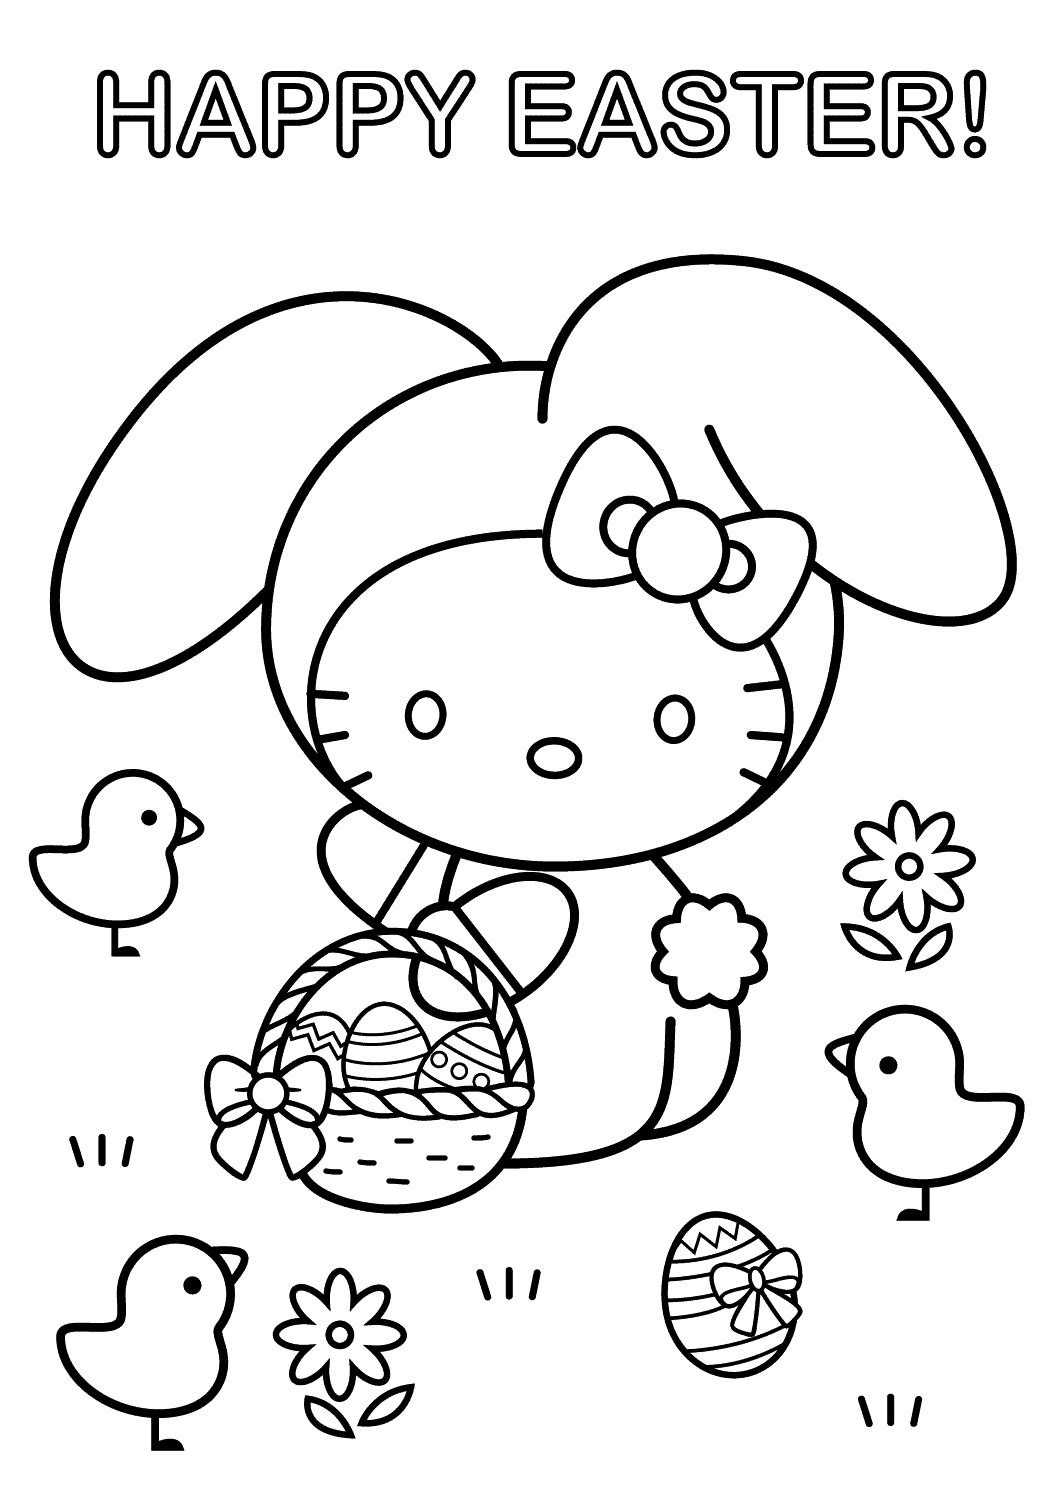 Free Easter Coloring Pages For Preschoolers